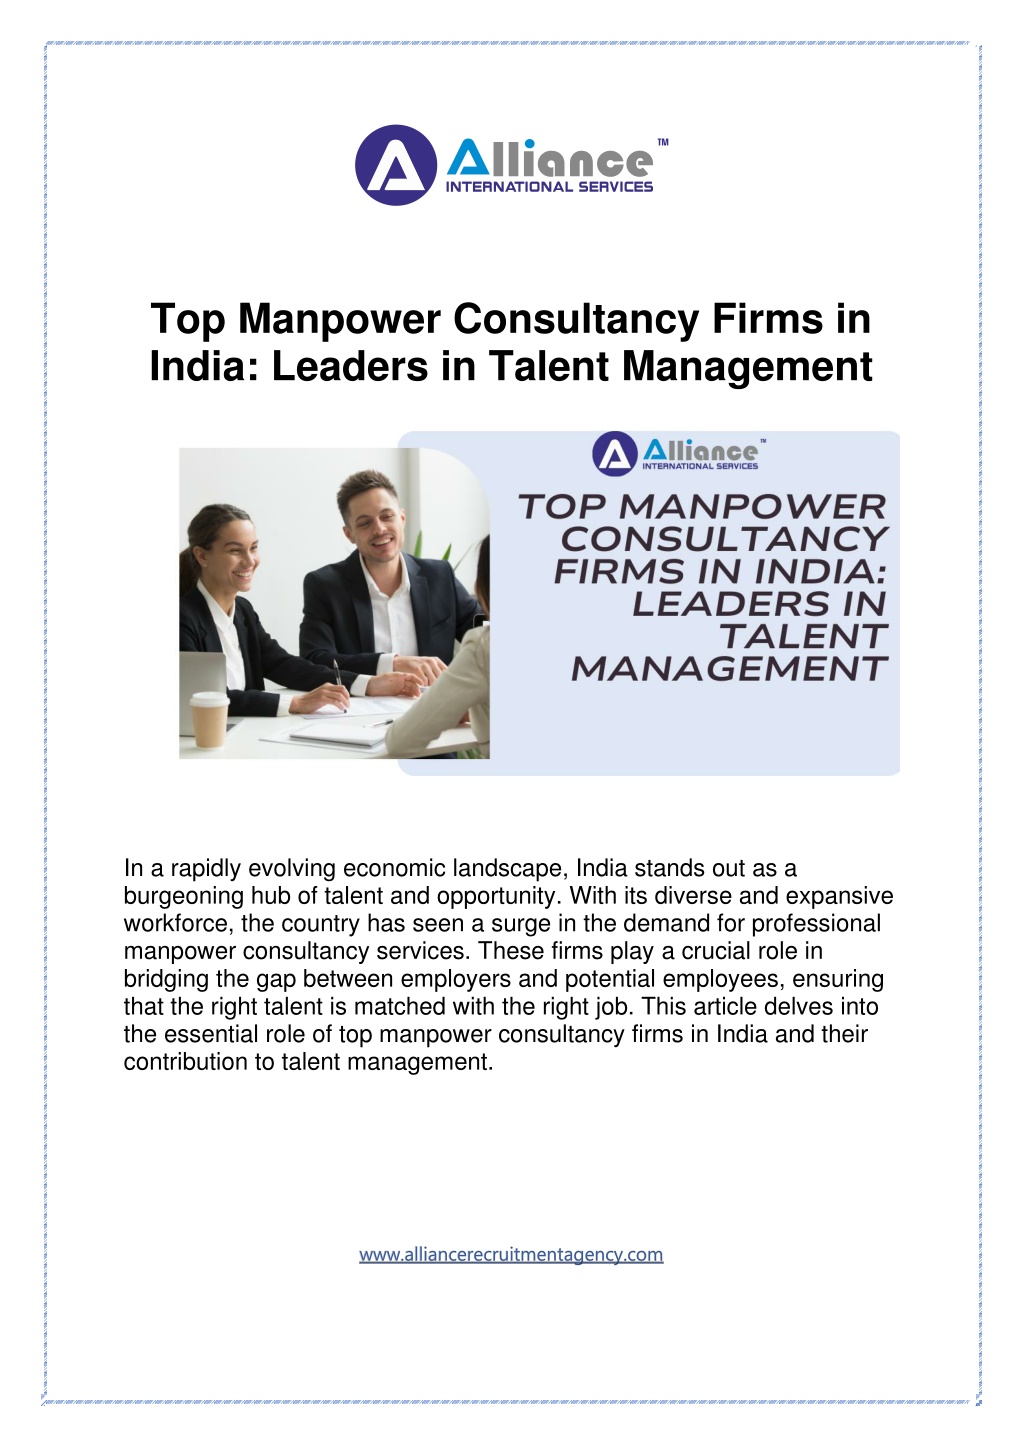 top manpower consultancy firms in india leaders l.w